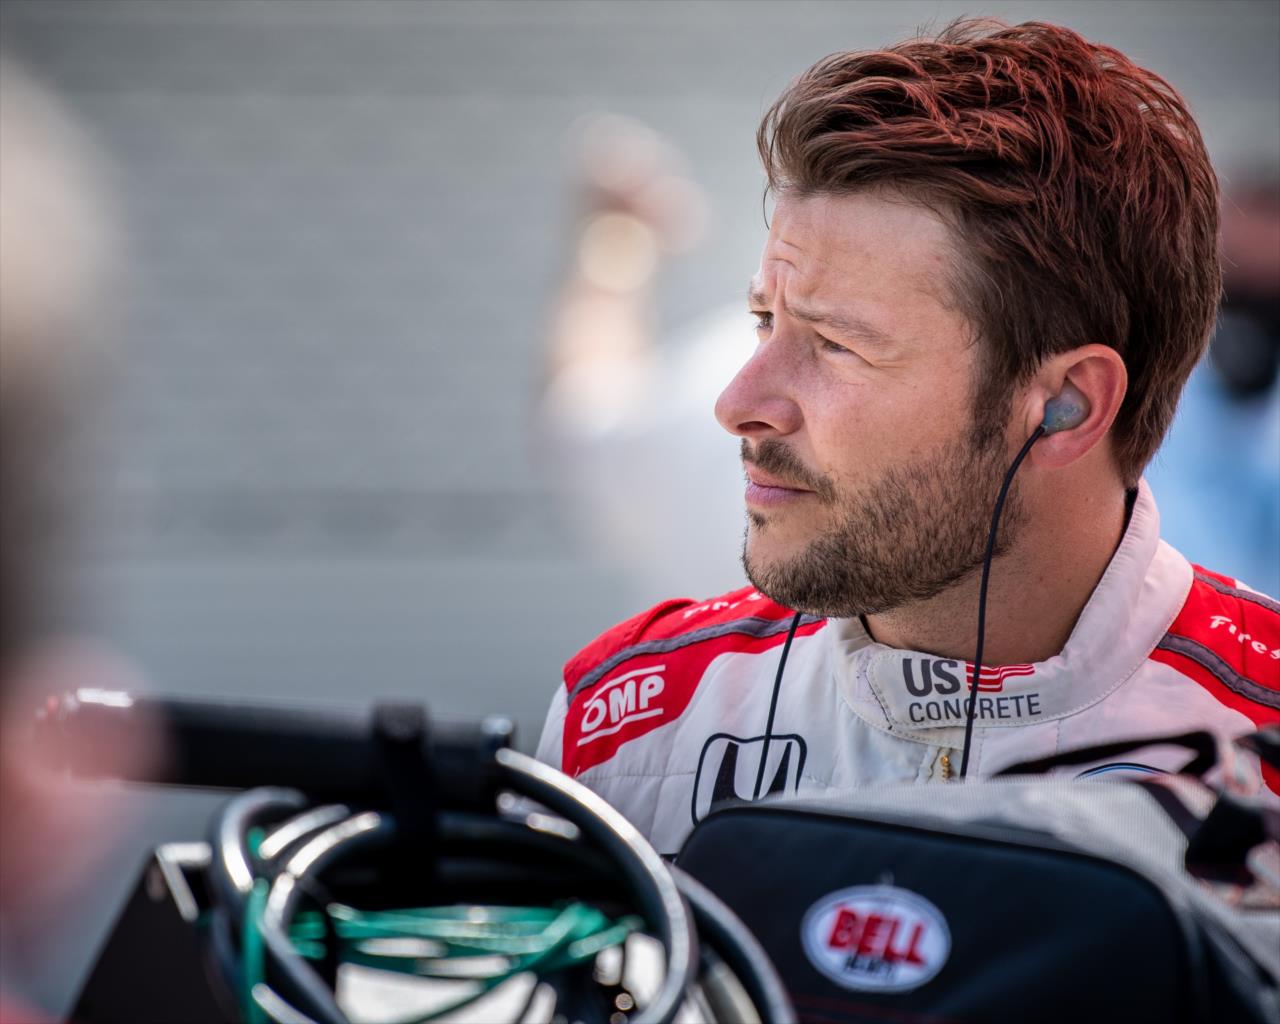 Marco Andretti before qualifying for the Indianapolis 500 at the Indianapolis Motor Speedway Saturday, August 15, 2020 -- Photo by: Karl Zemlin